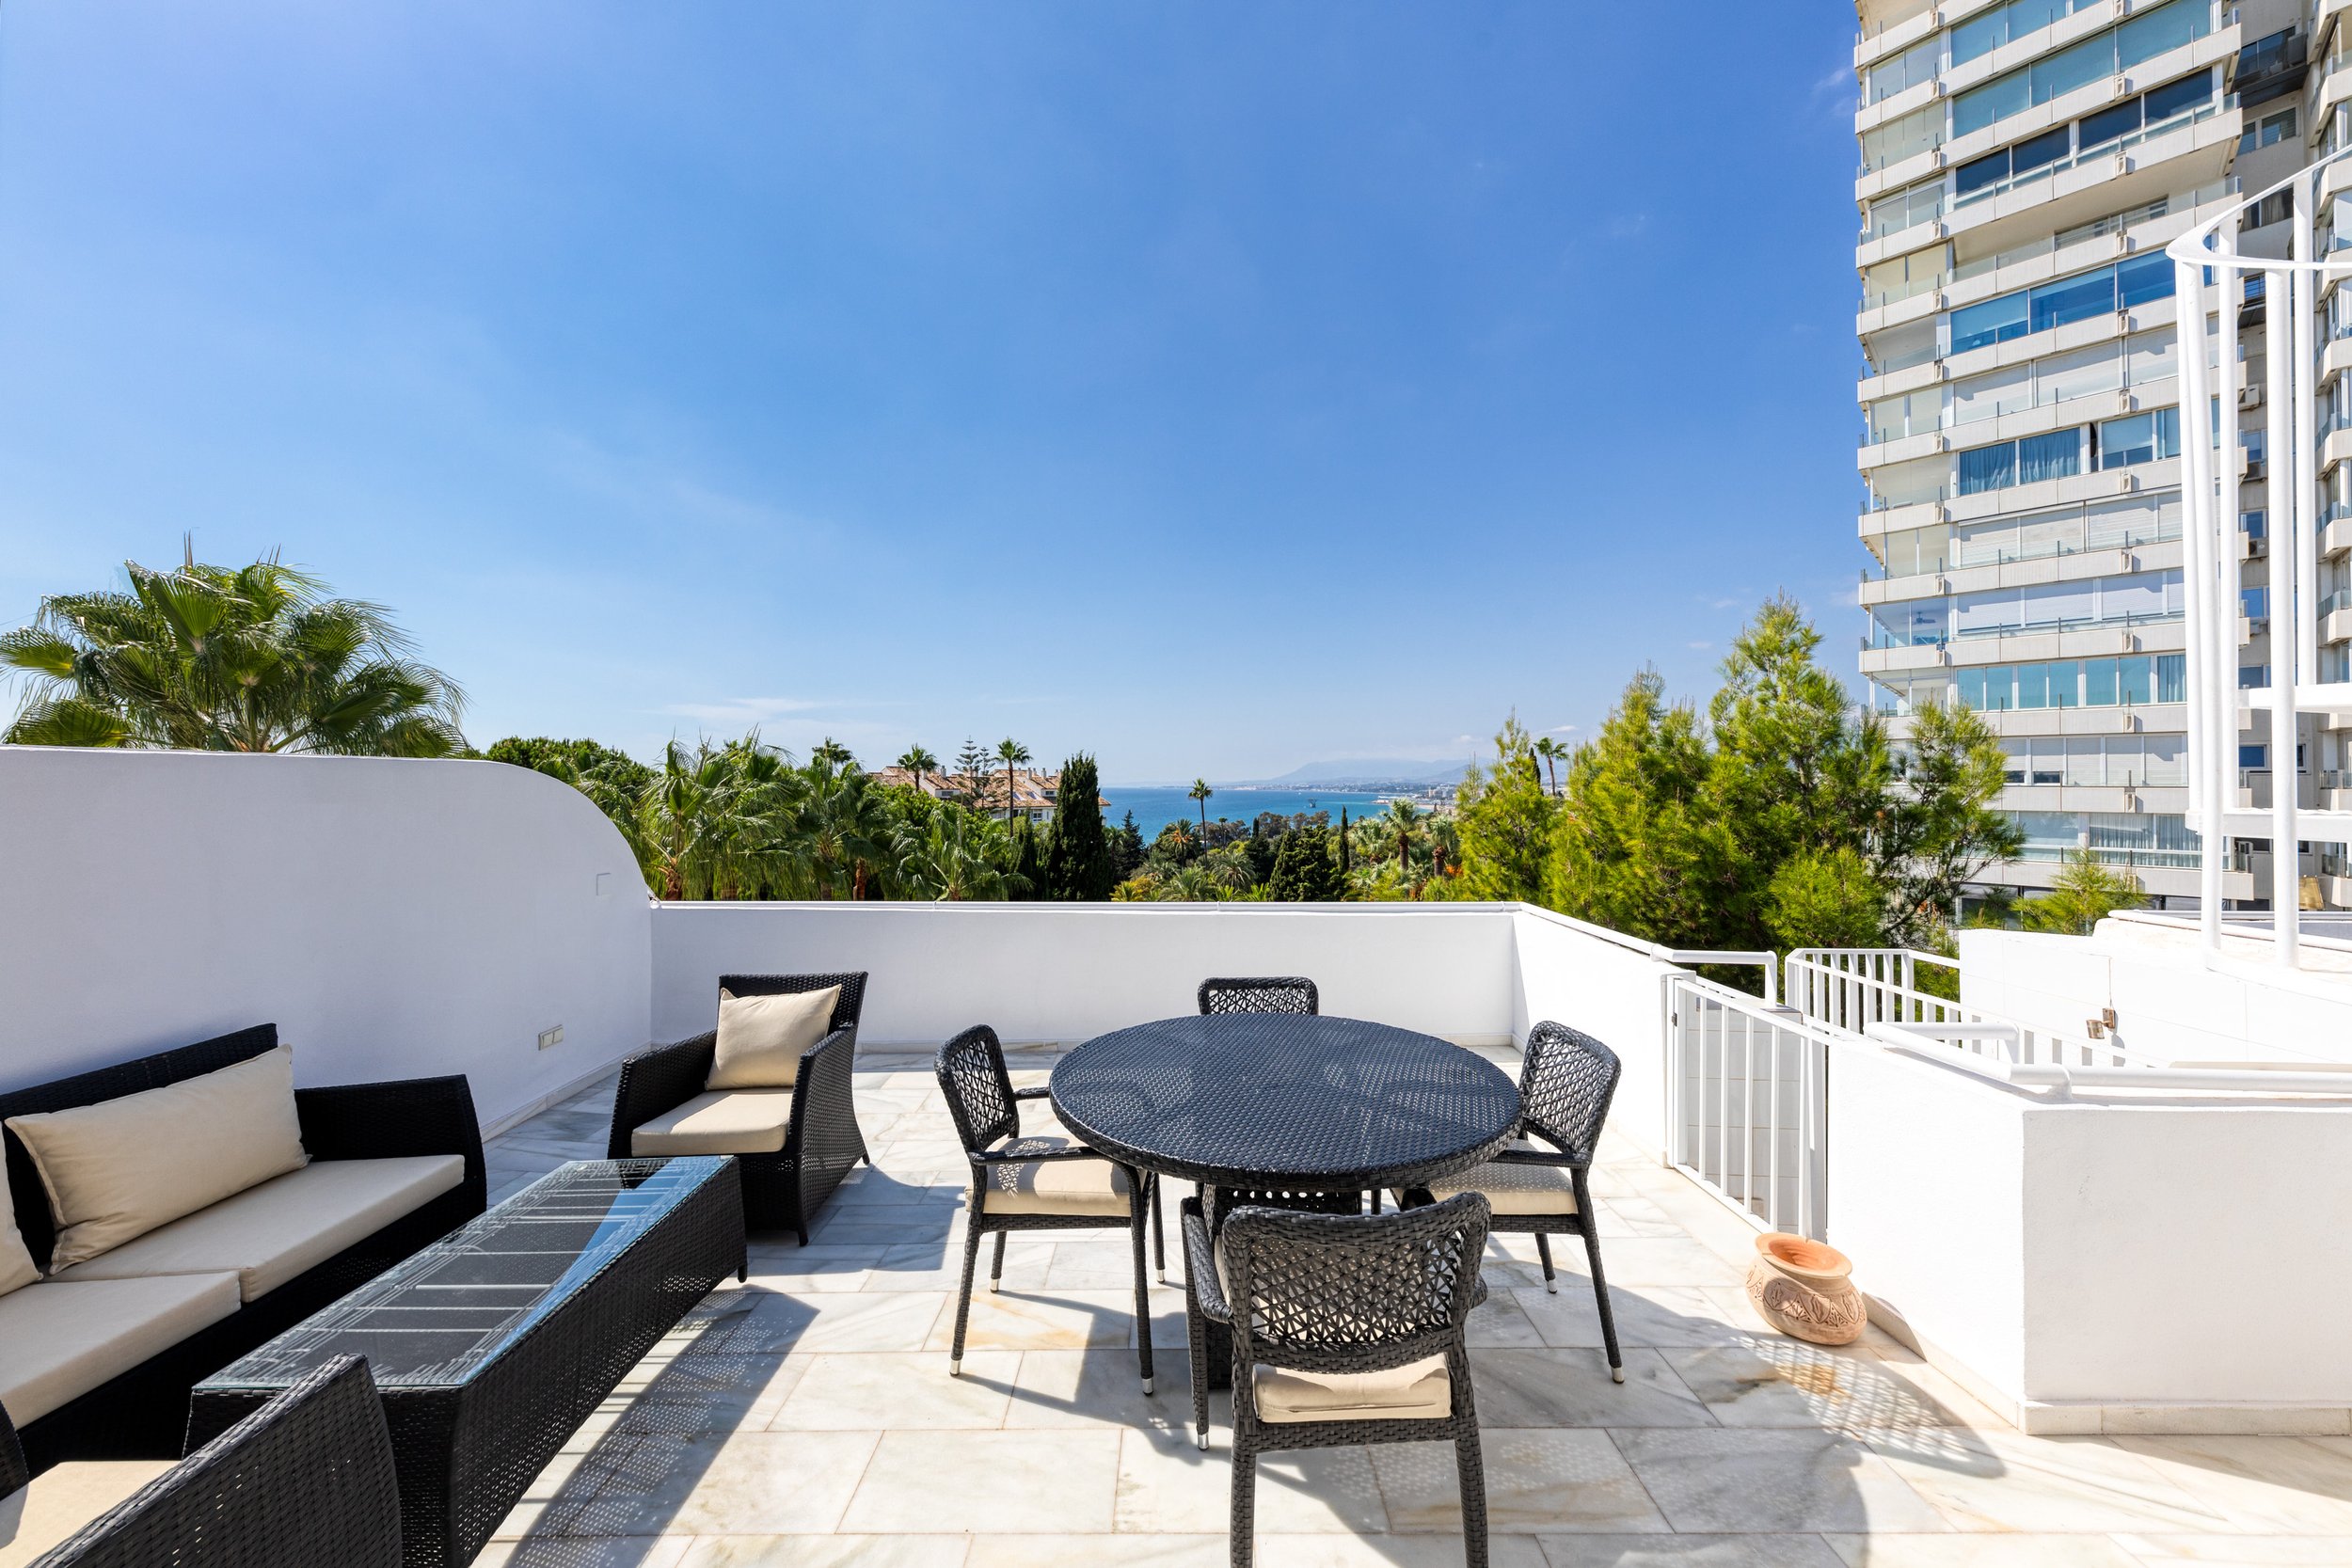 for-sale-renovated-three-bedroom-duplex-penthouse-rio-real-marbella-fs8795-6.jpg